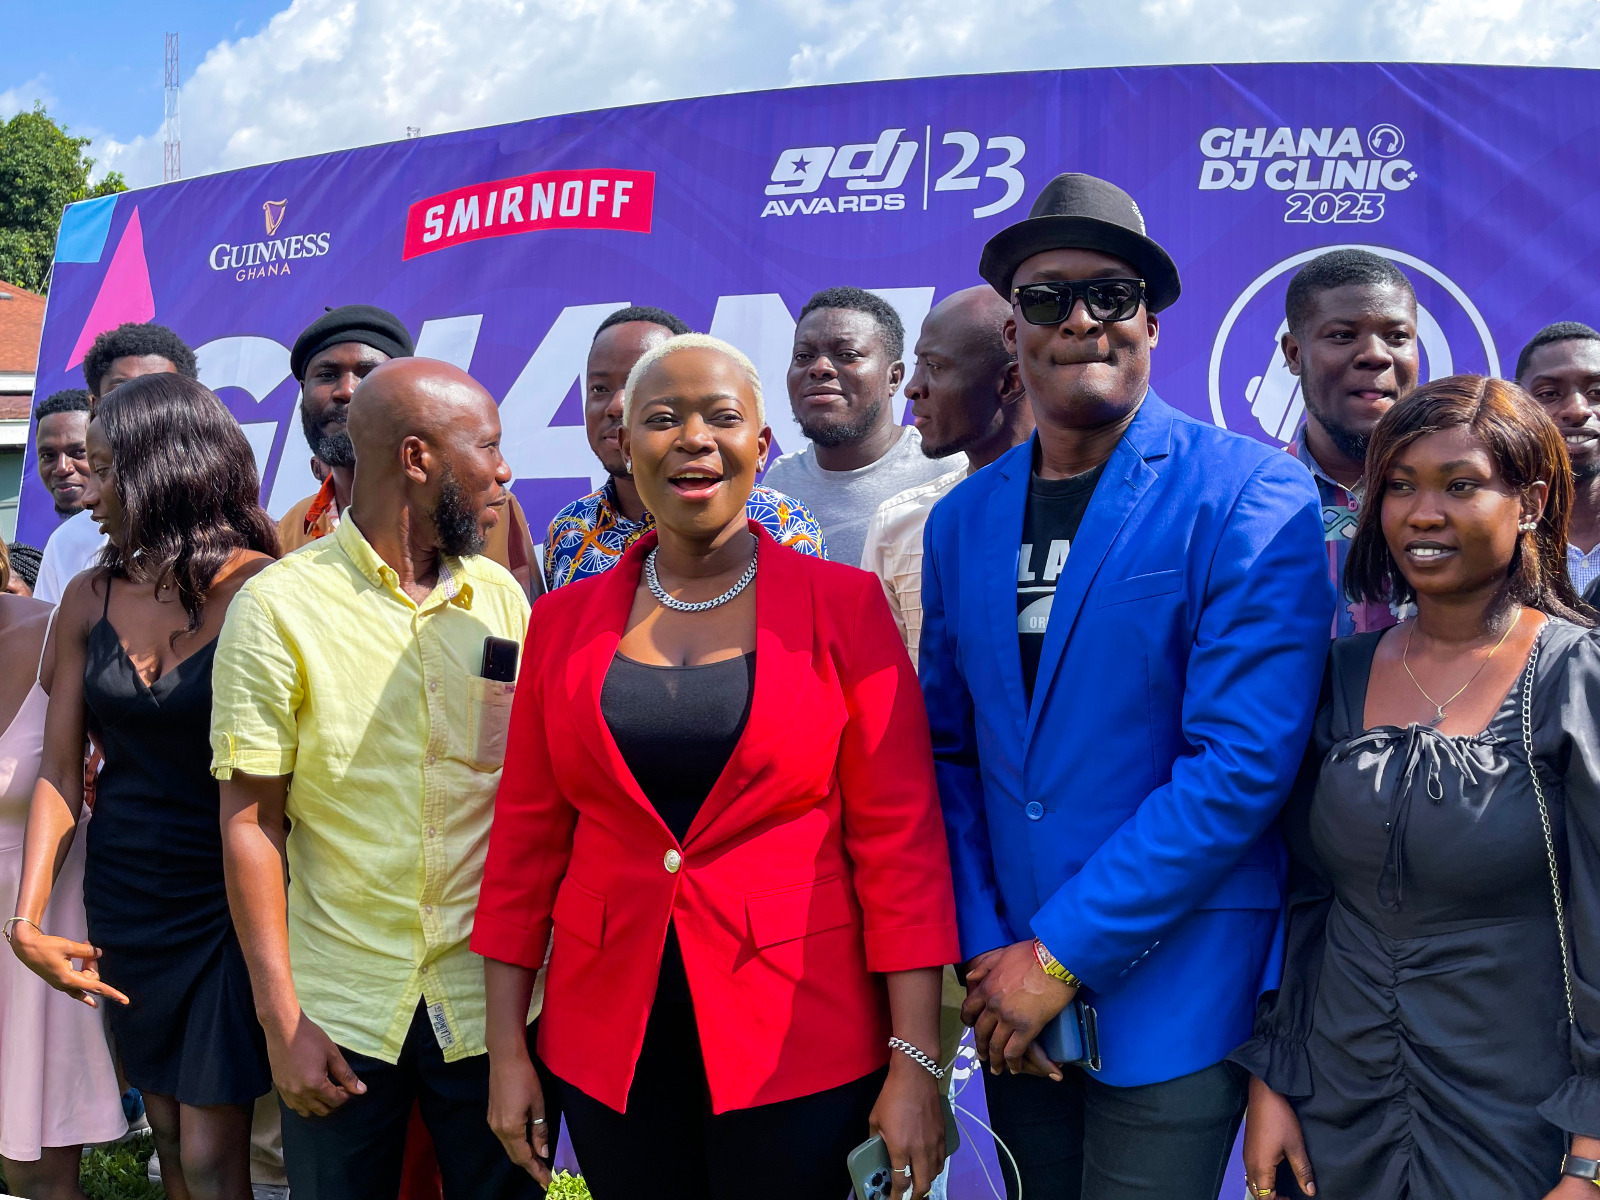 Ghana DJ Clinic 2023 launched in Kumasi to empower DJs and promote inclusion